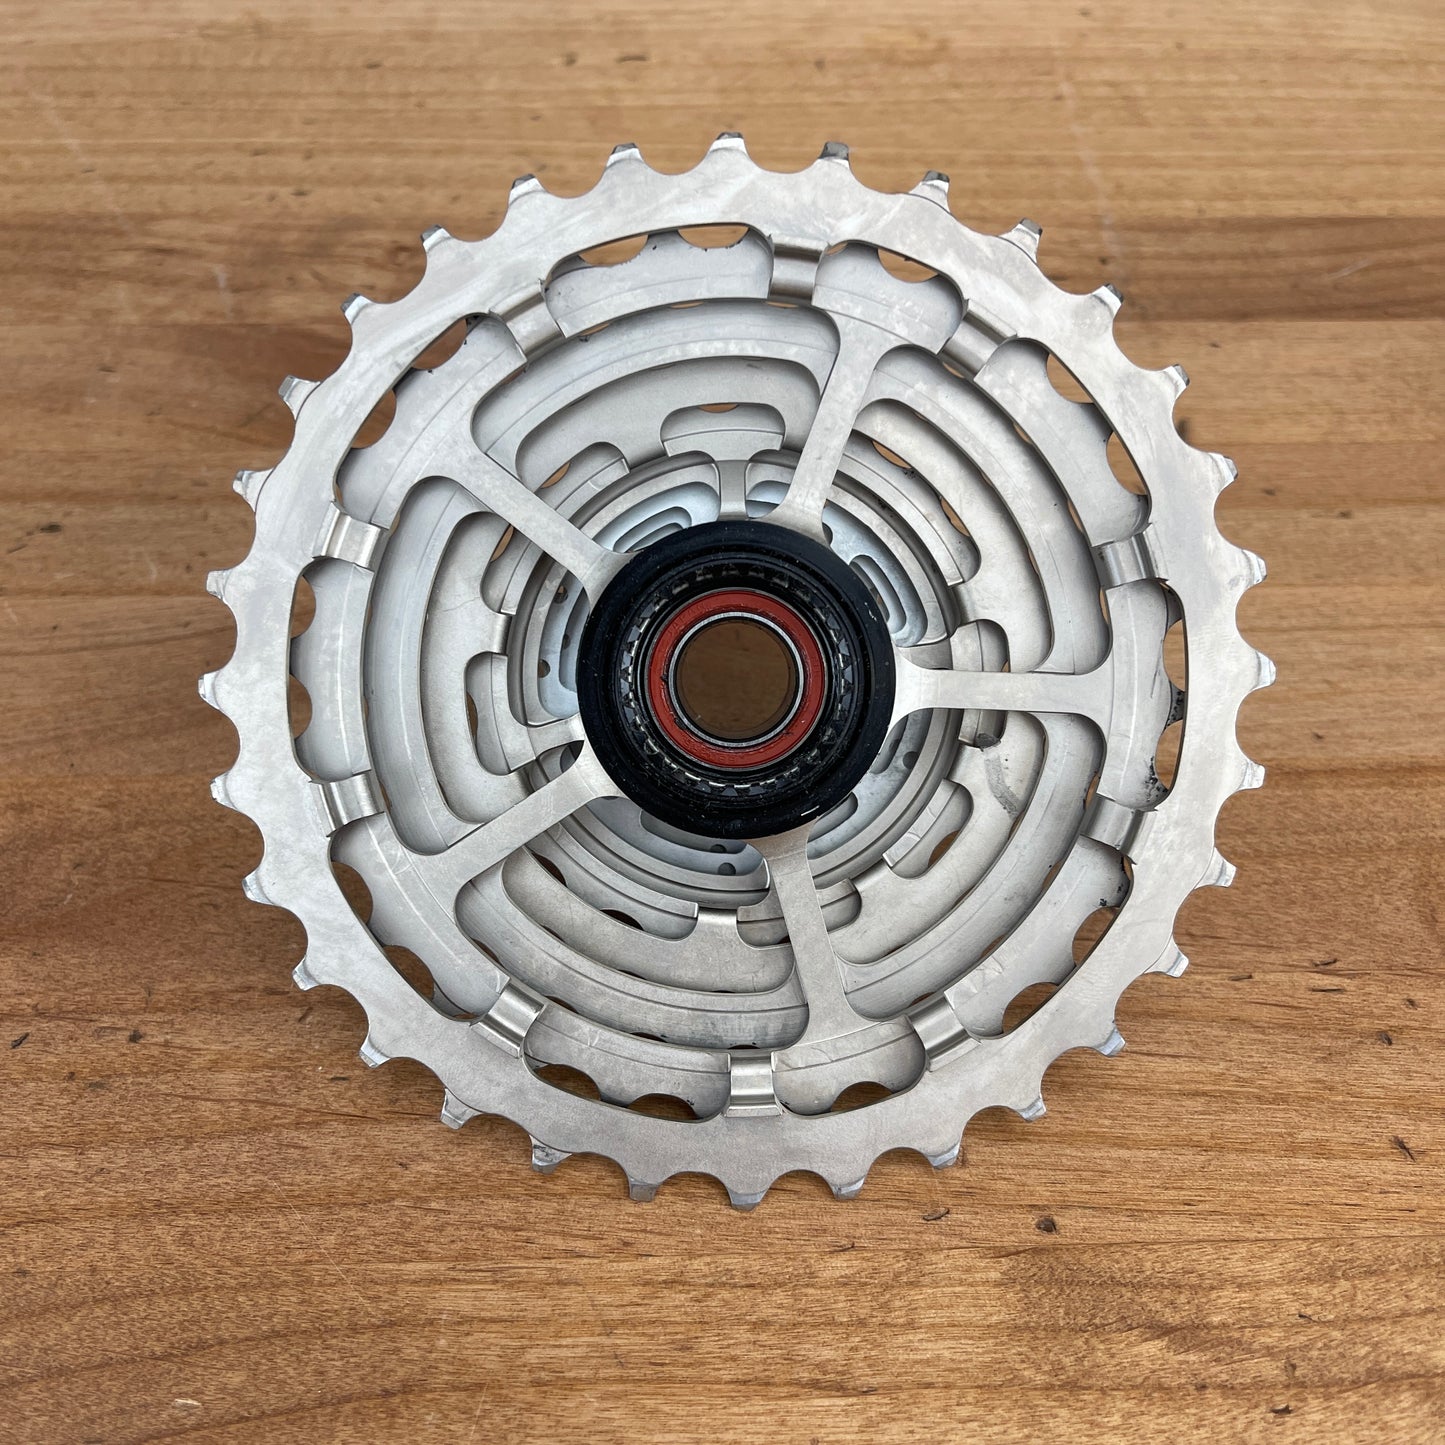 Campagnolo Super Record 12 11-32t 12-Speed Cycling Cassette "Typical Wear"